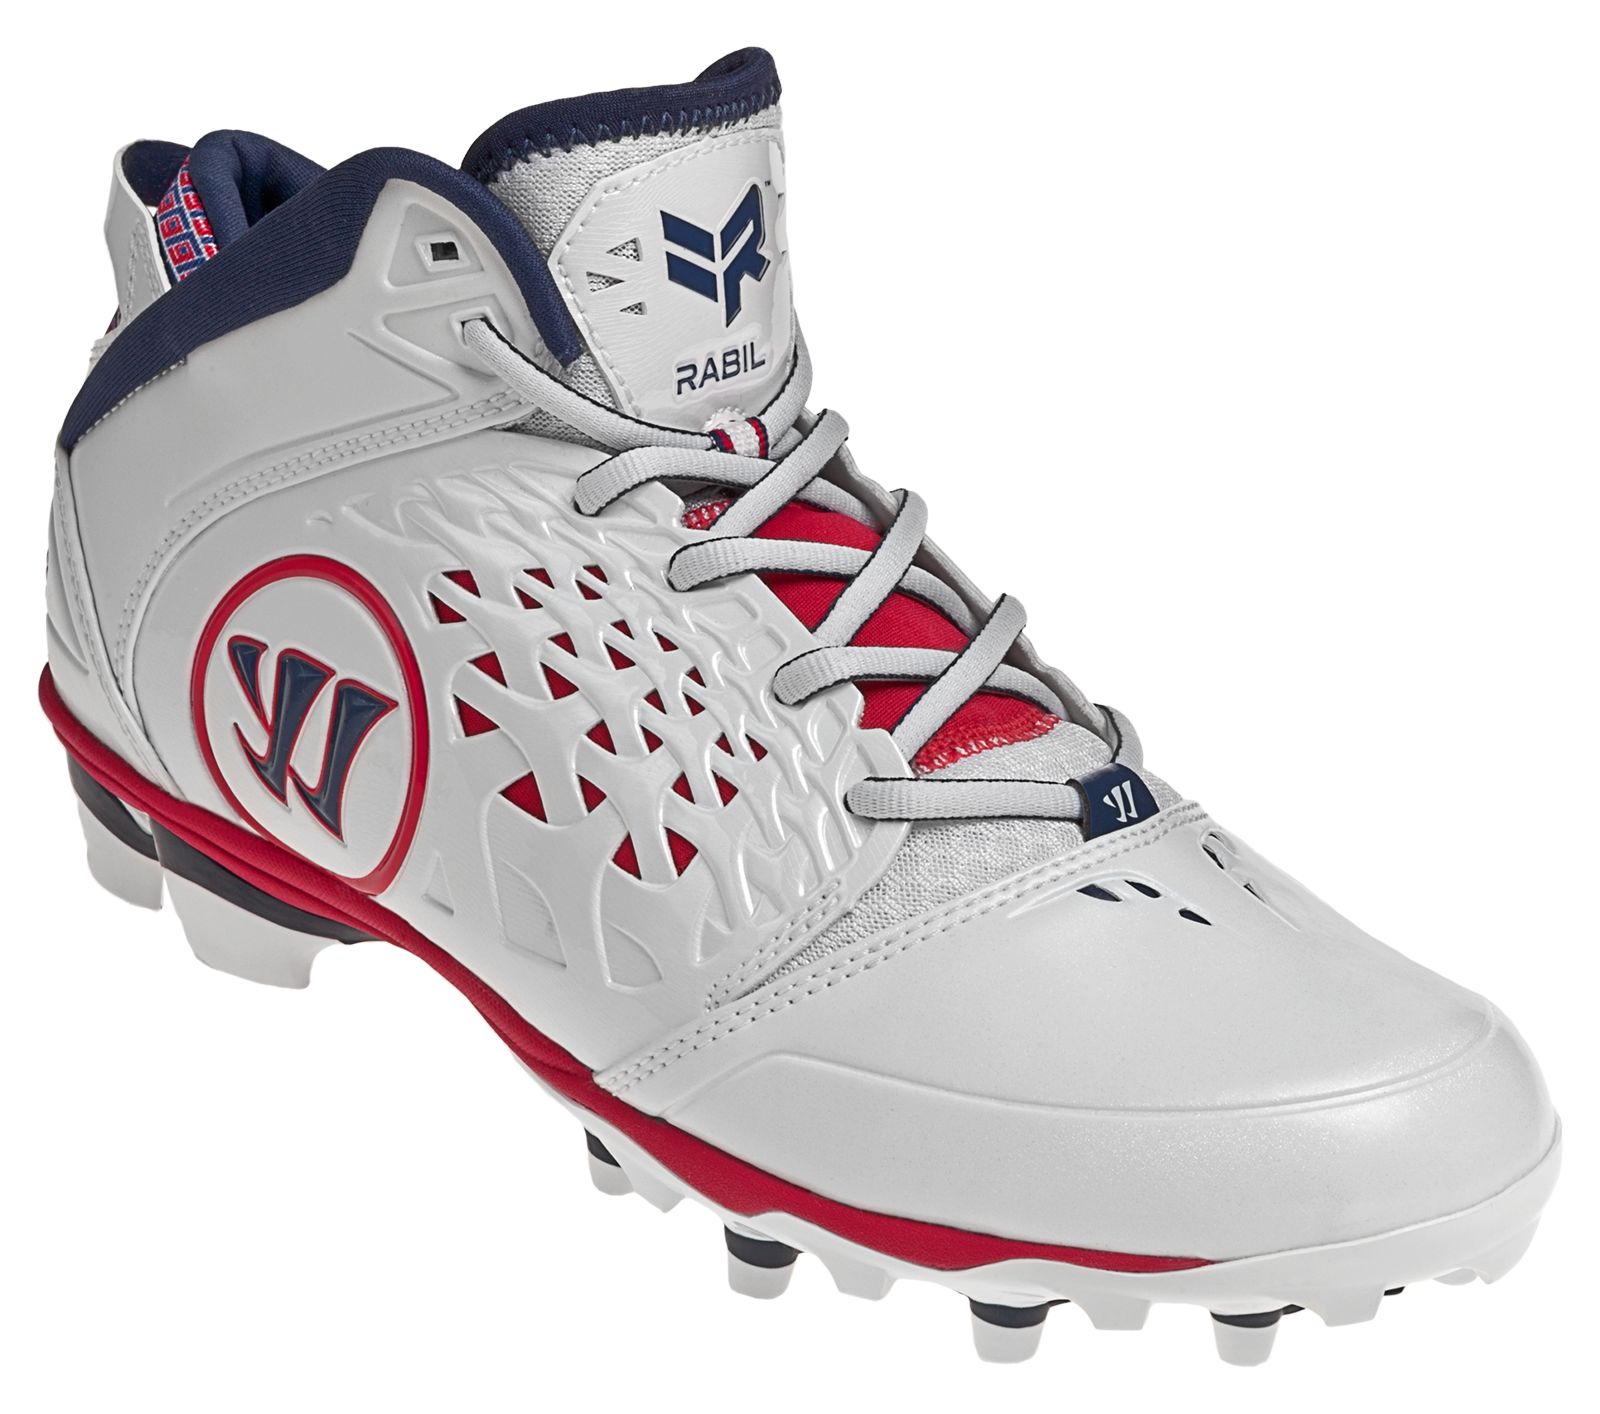 Adonis Cleat - Rabil Edition, White with Red & Blue image number 6